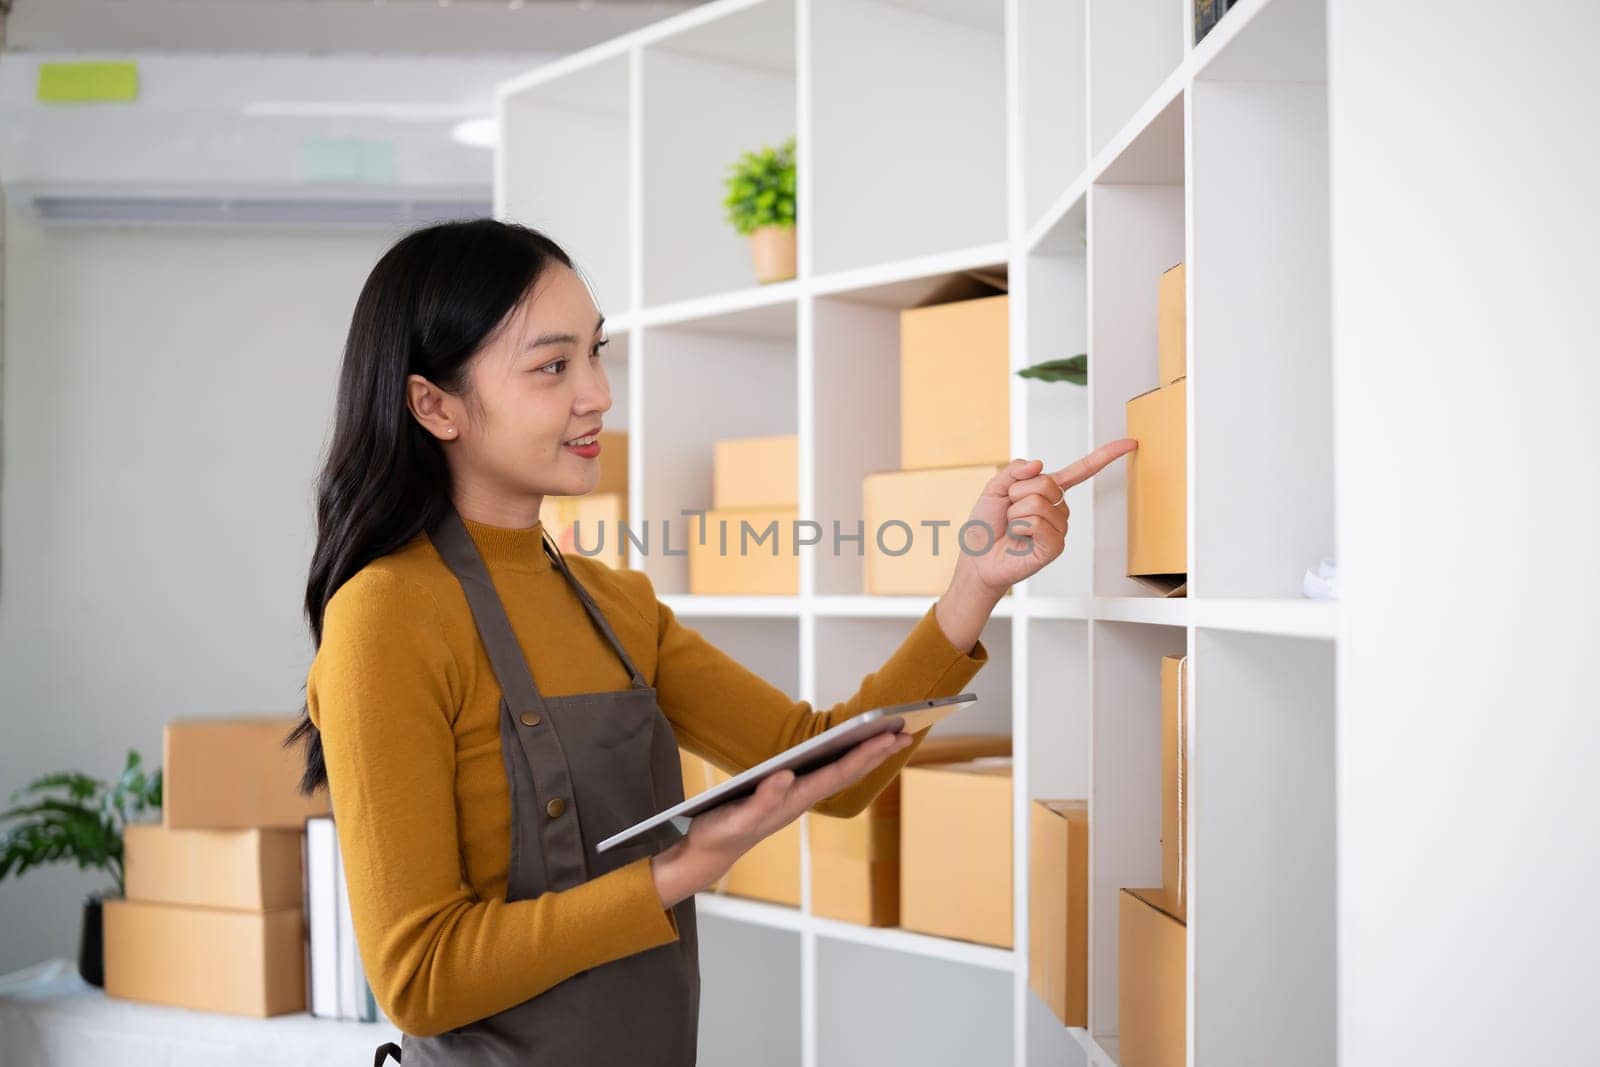 Young woman working in warehouse with packages using tablet for inventory management.